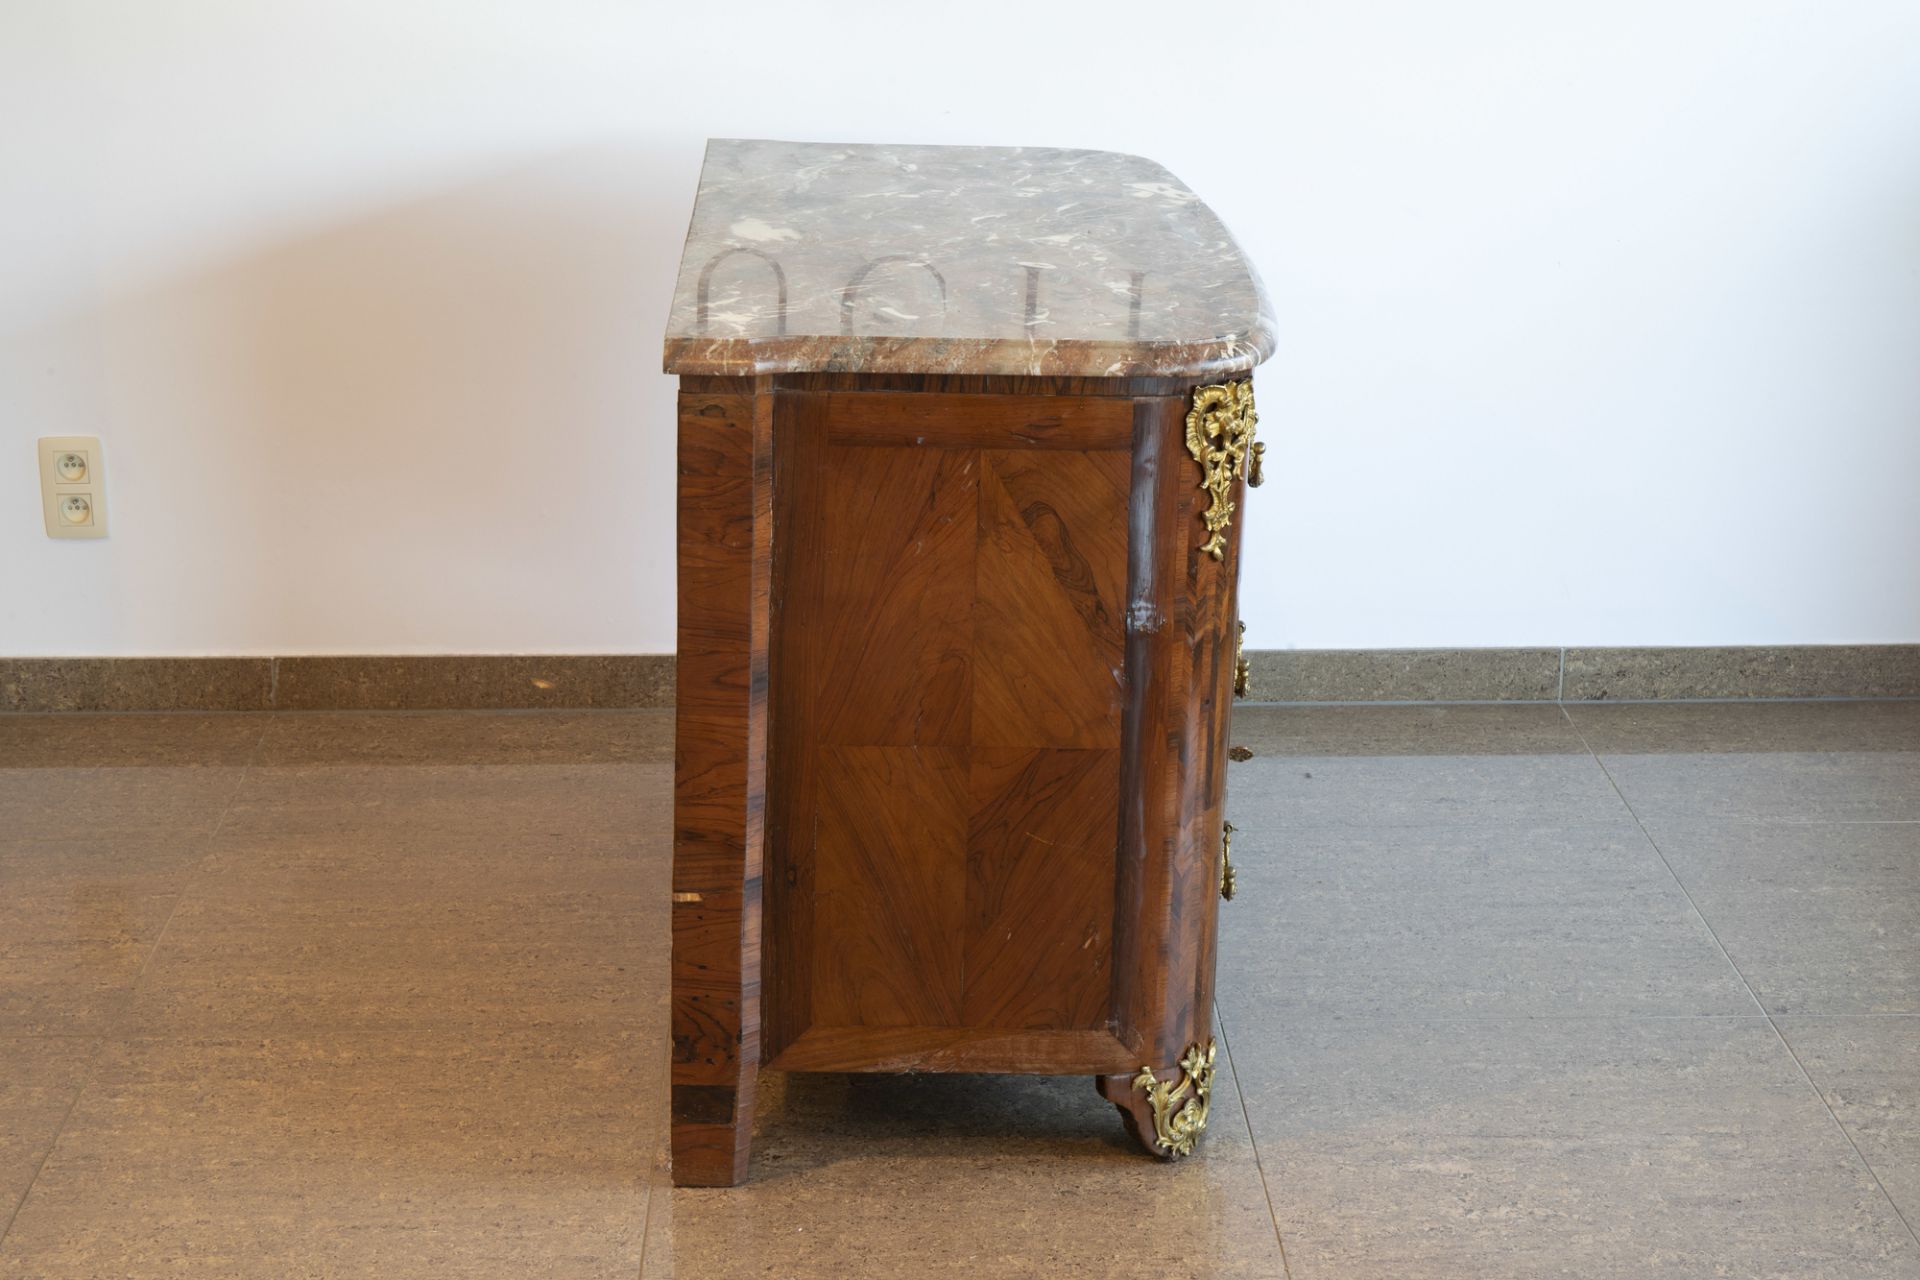 A French Regence style gilt bronze mounted chest of drawers with marble top, 18th C. - Image 4 of 8